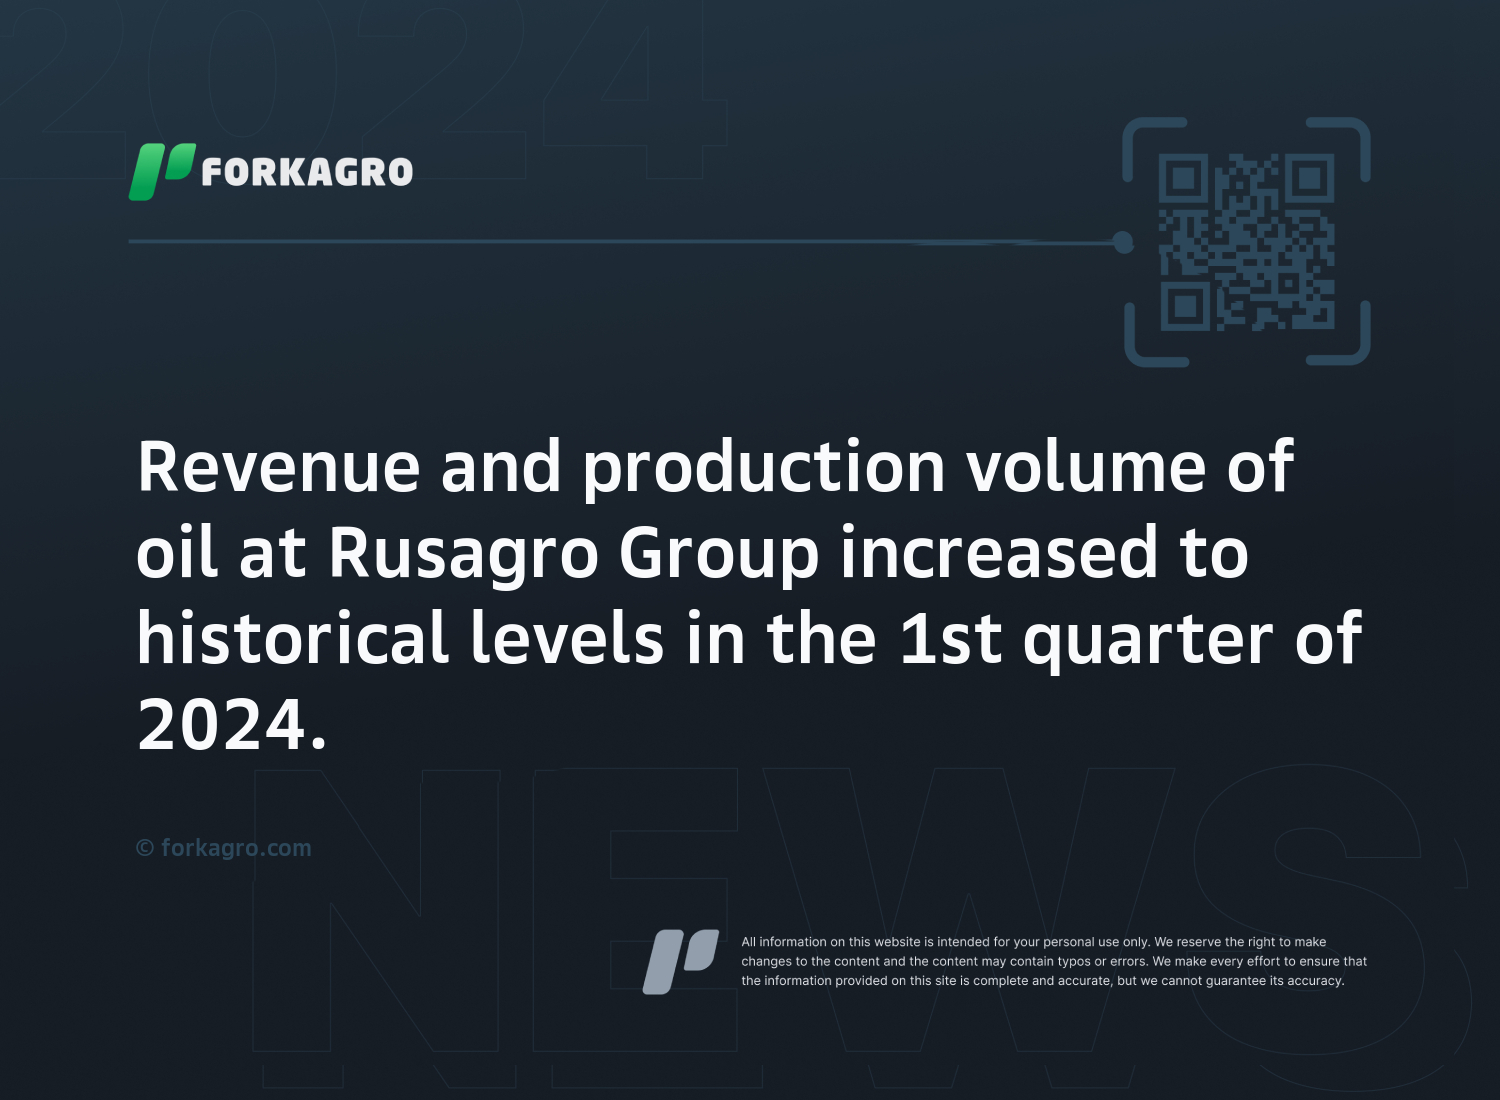 Revenue and production volume of oil at Rusagro Group increased to historical levels in the 1st quarter of 2024.